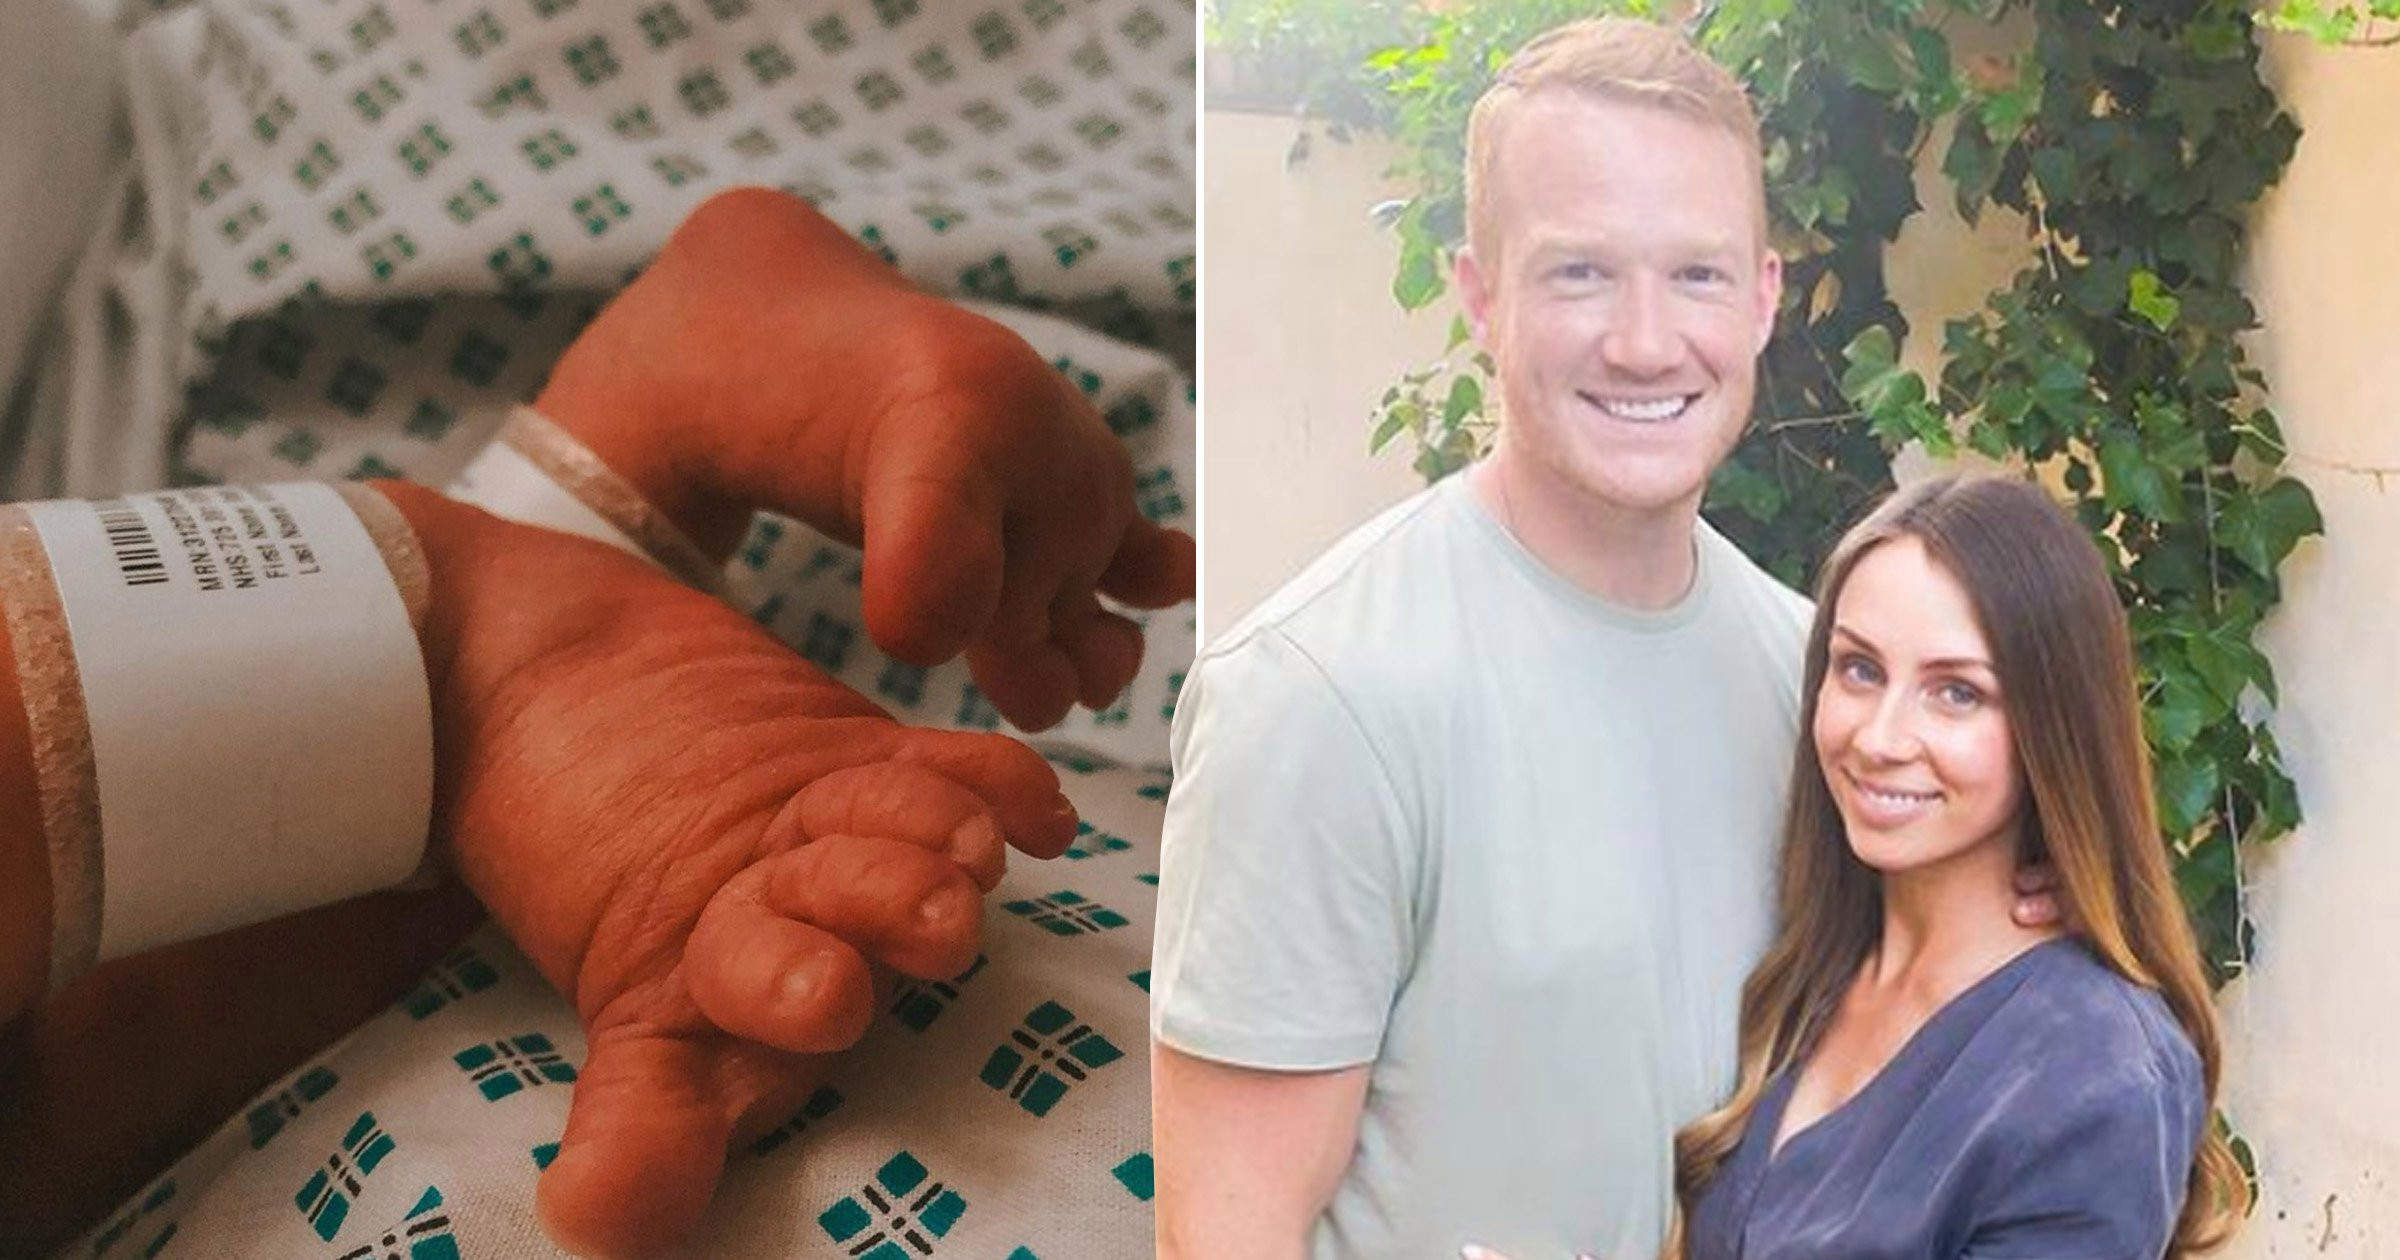 Strictly Come Dancing’s Greg Rutherford welcomes third child with fiancee as she gives birth to baby girl